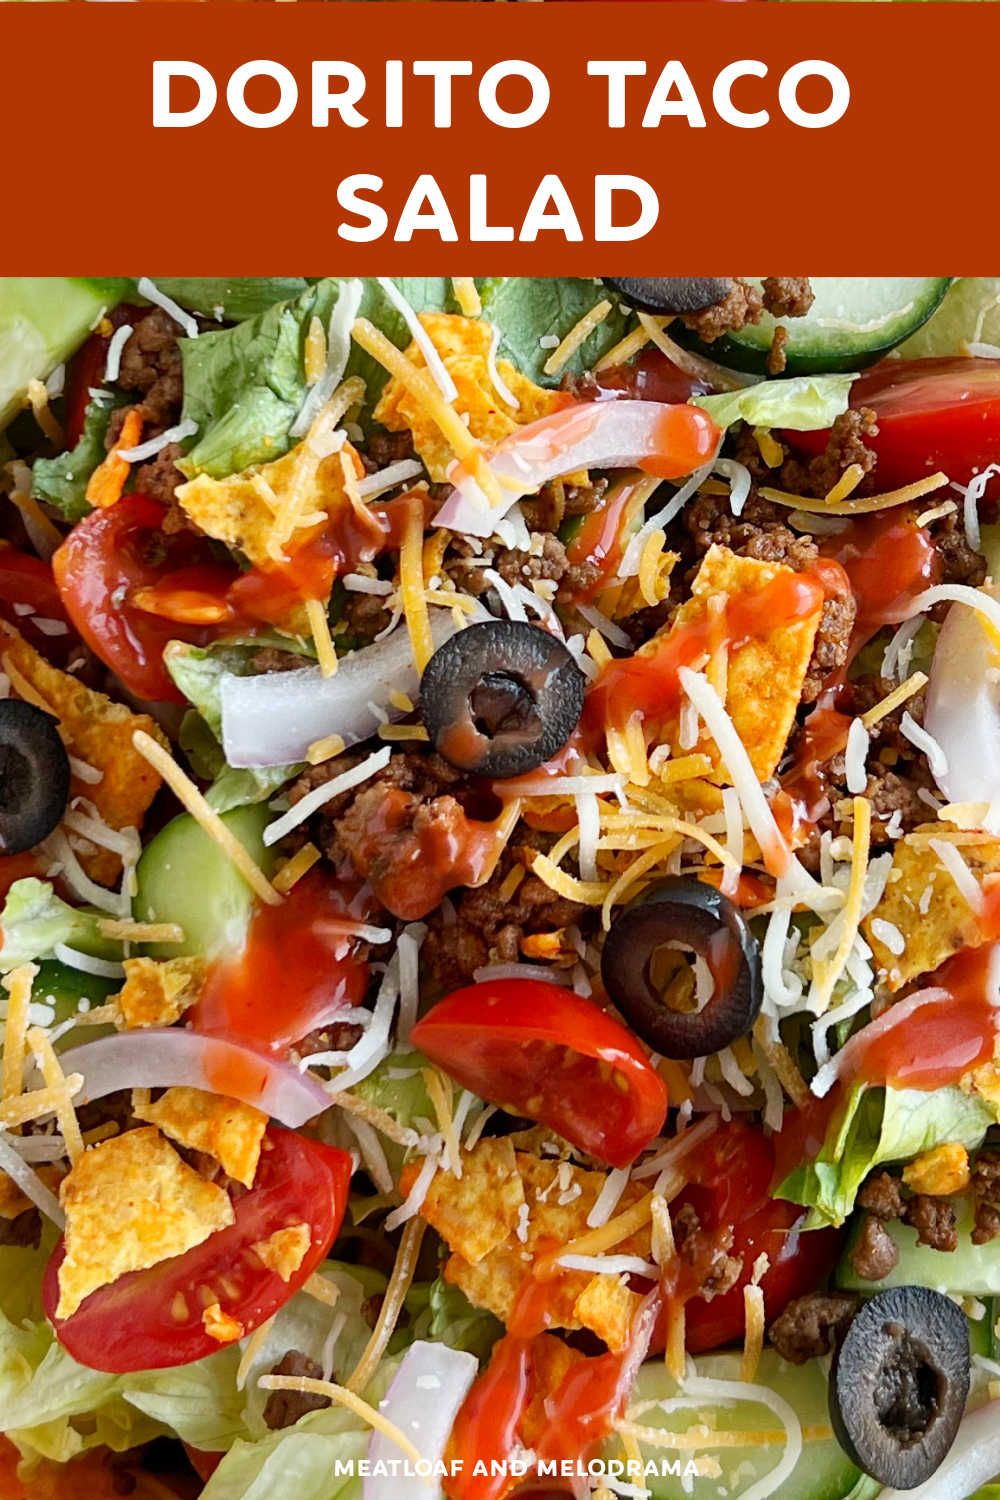 Easy Dorito Taco Salad with Doritos, Catalina Dressing and seasoned taco meat is a delicious salad and an easy meal your whole family will love. Perfect for a potluck dinner, family gatherings or a quick weeknight meal! via @meamel